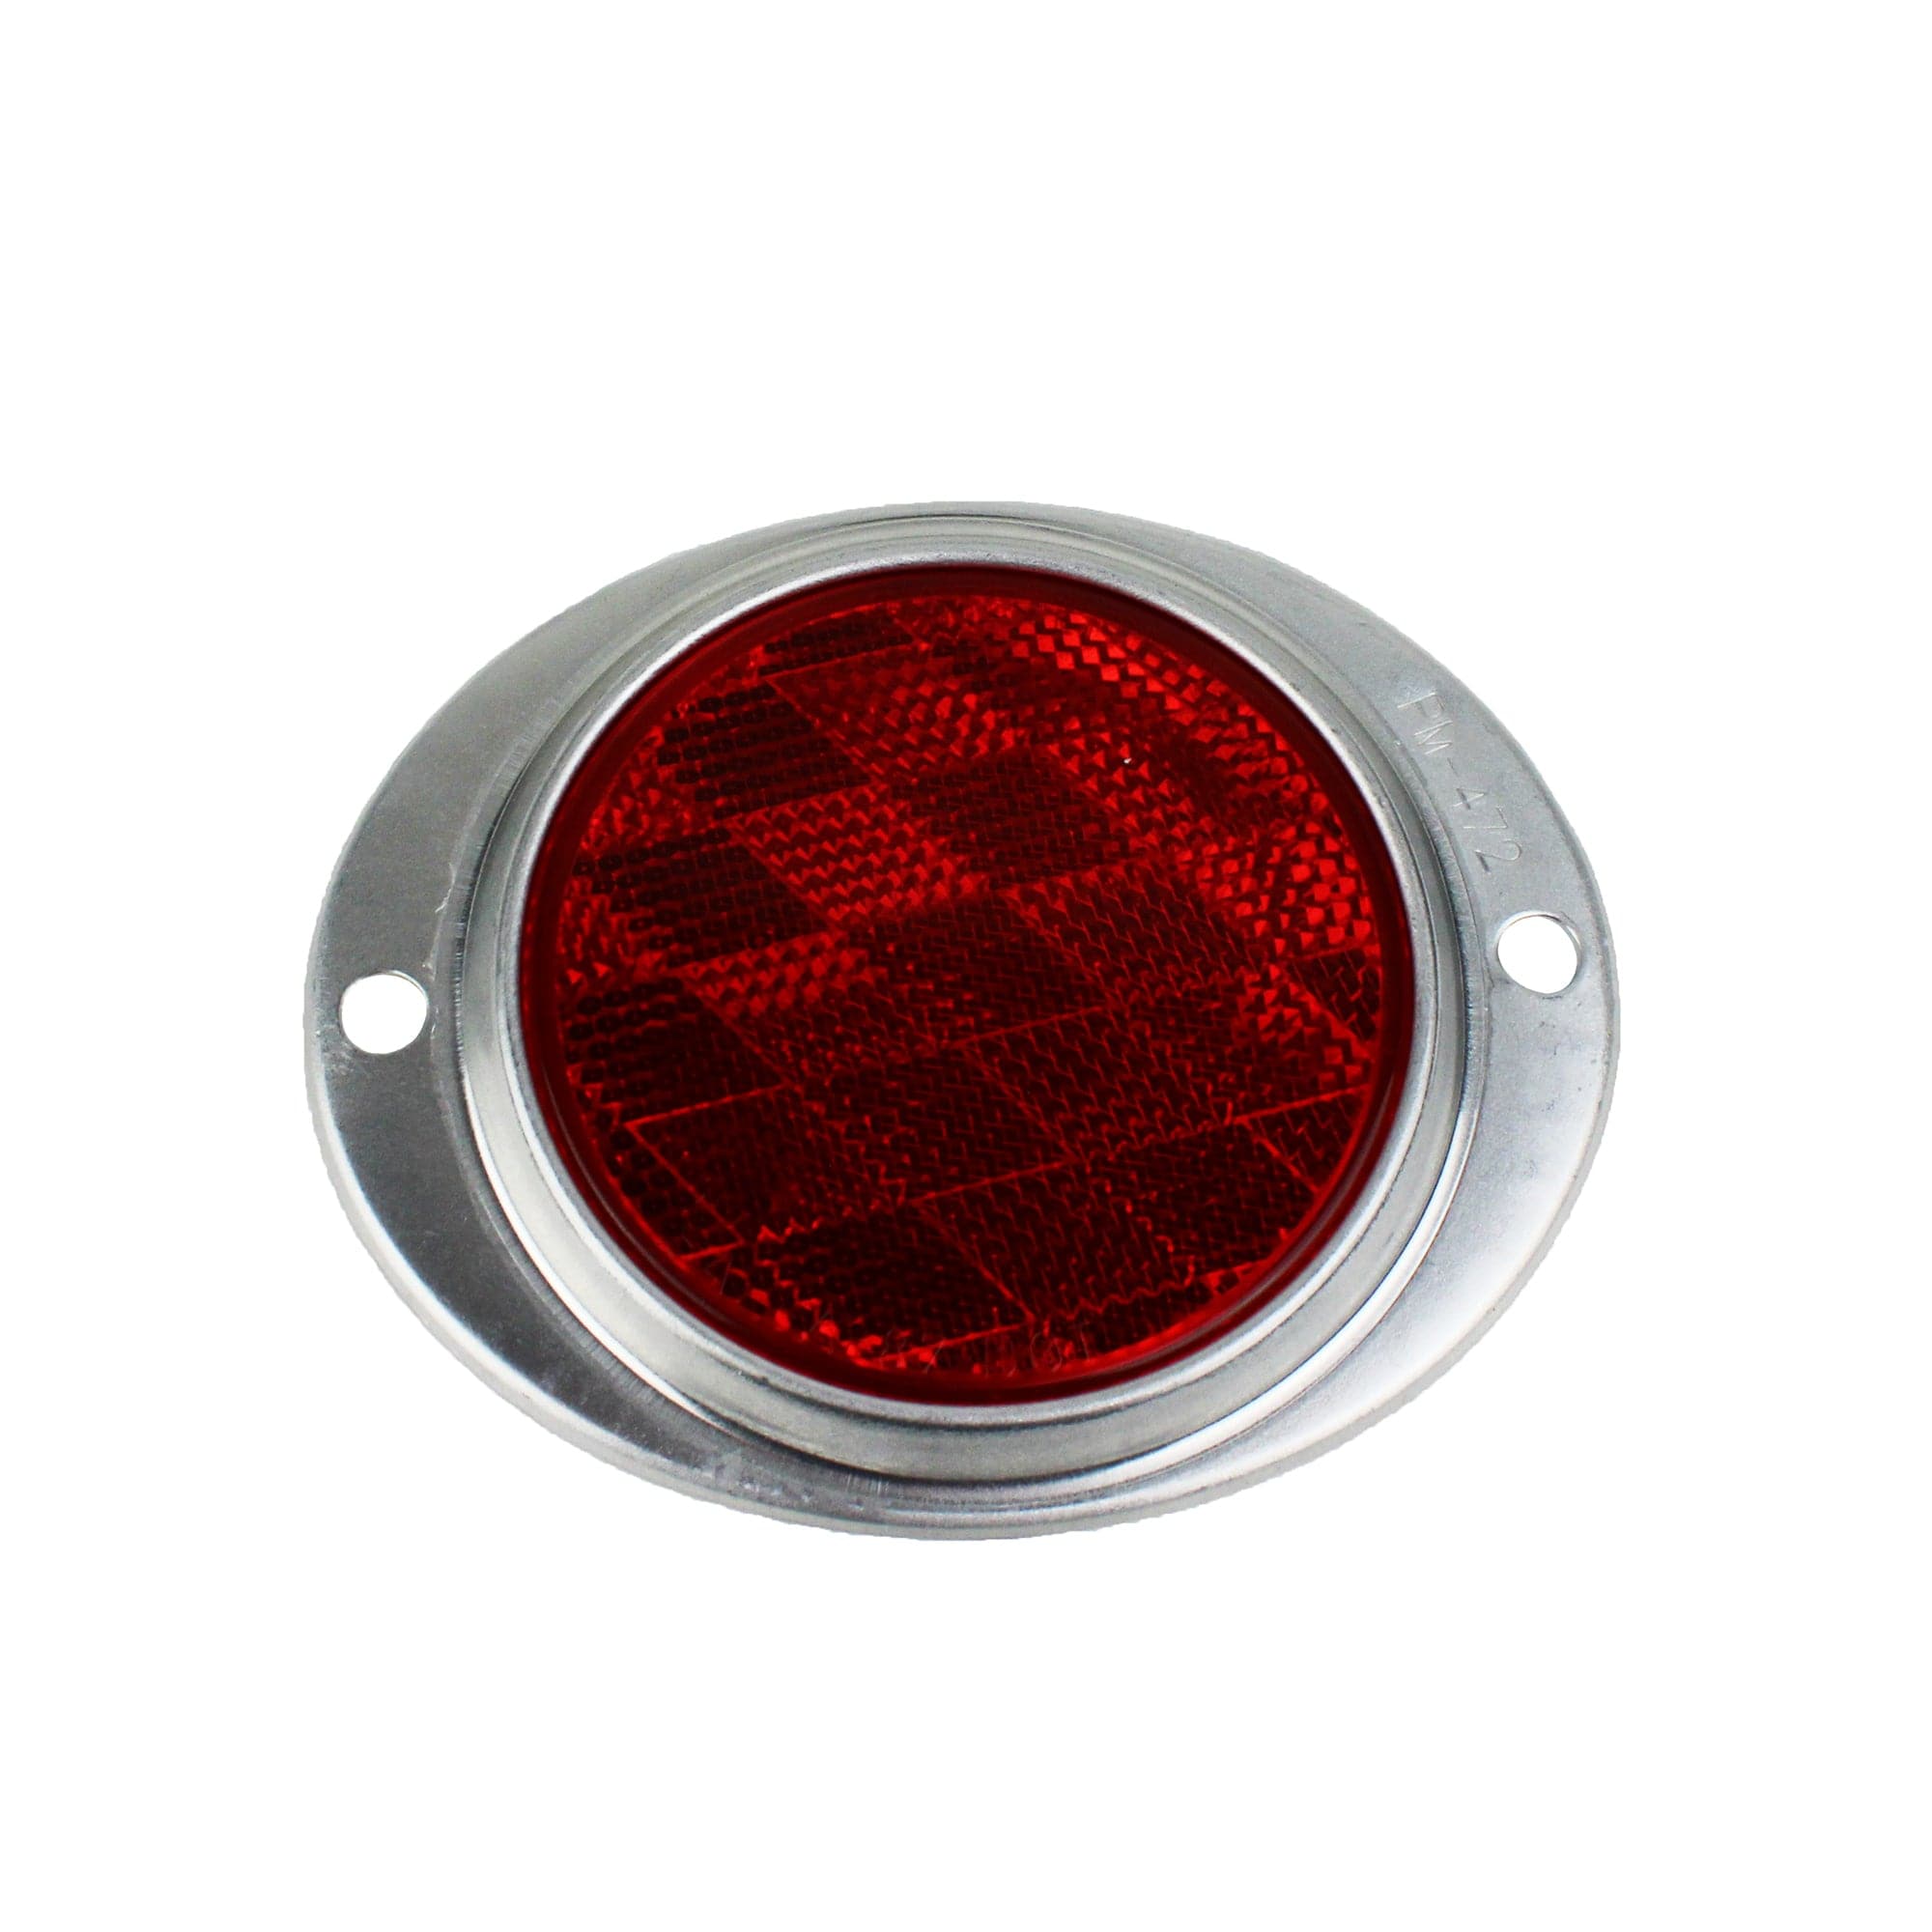 Anderson Marine / Peterson MFG V472R 3" Oval Reflector, Aluminum - Red